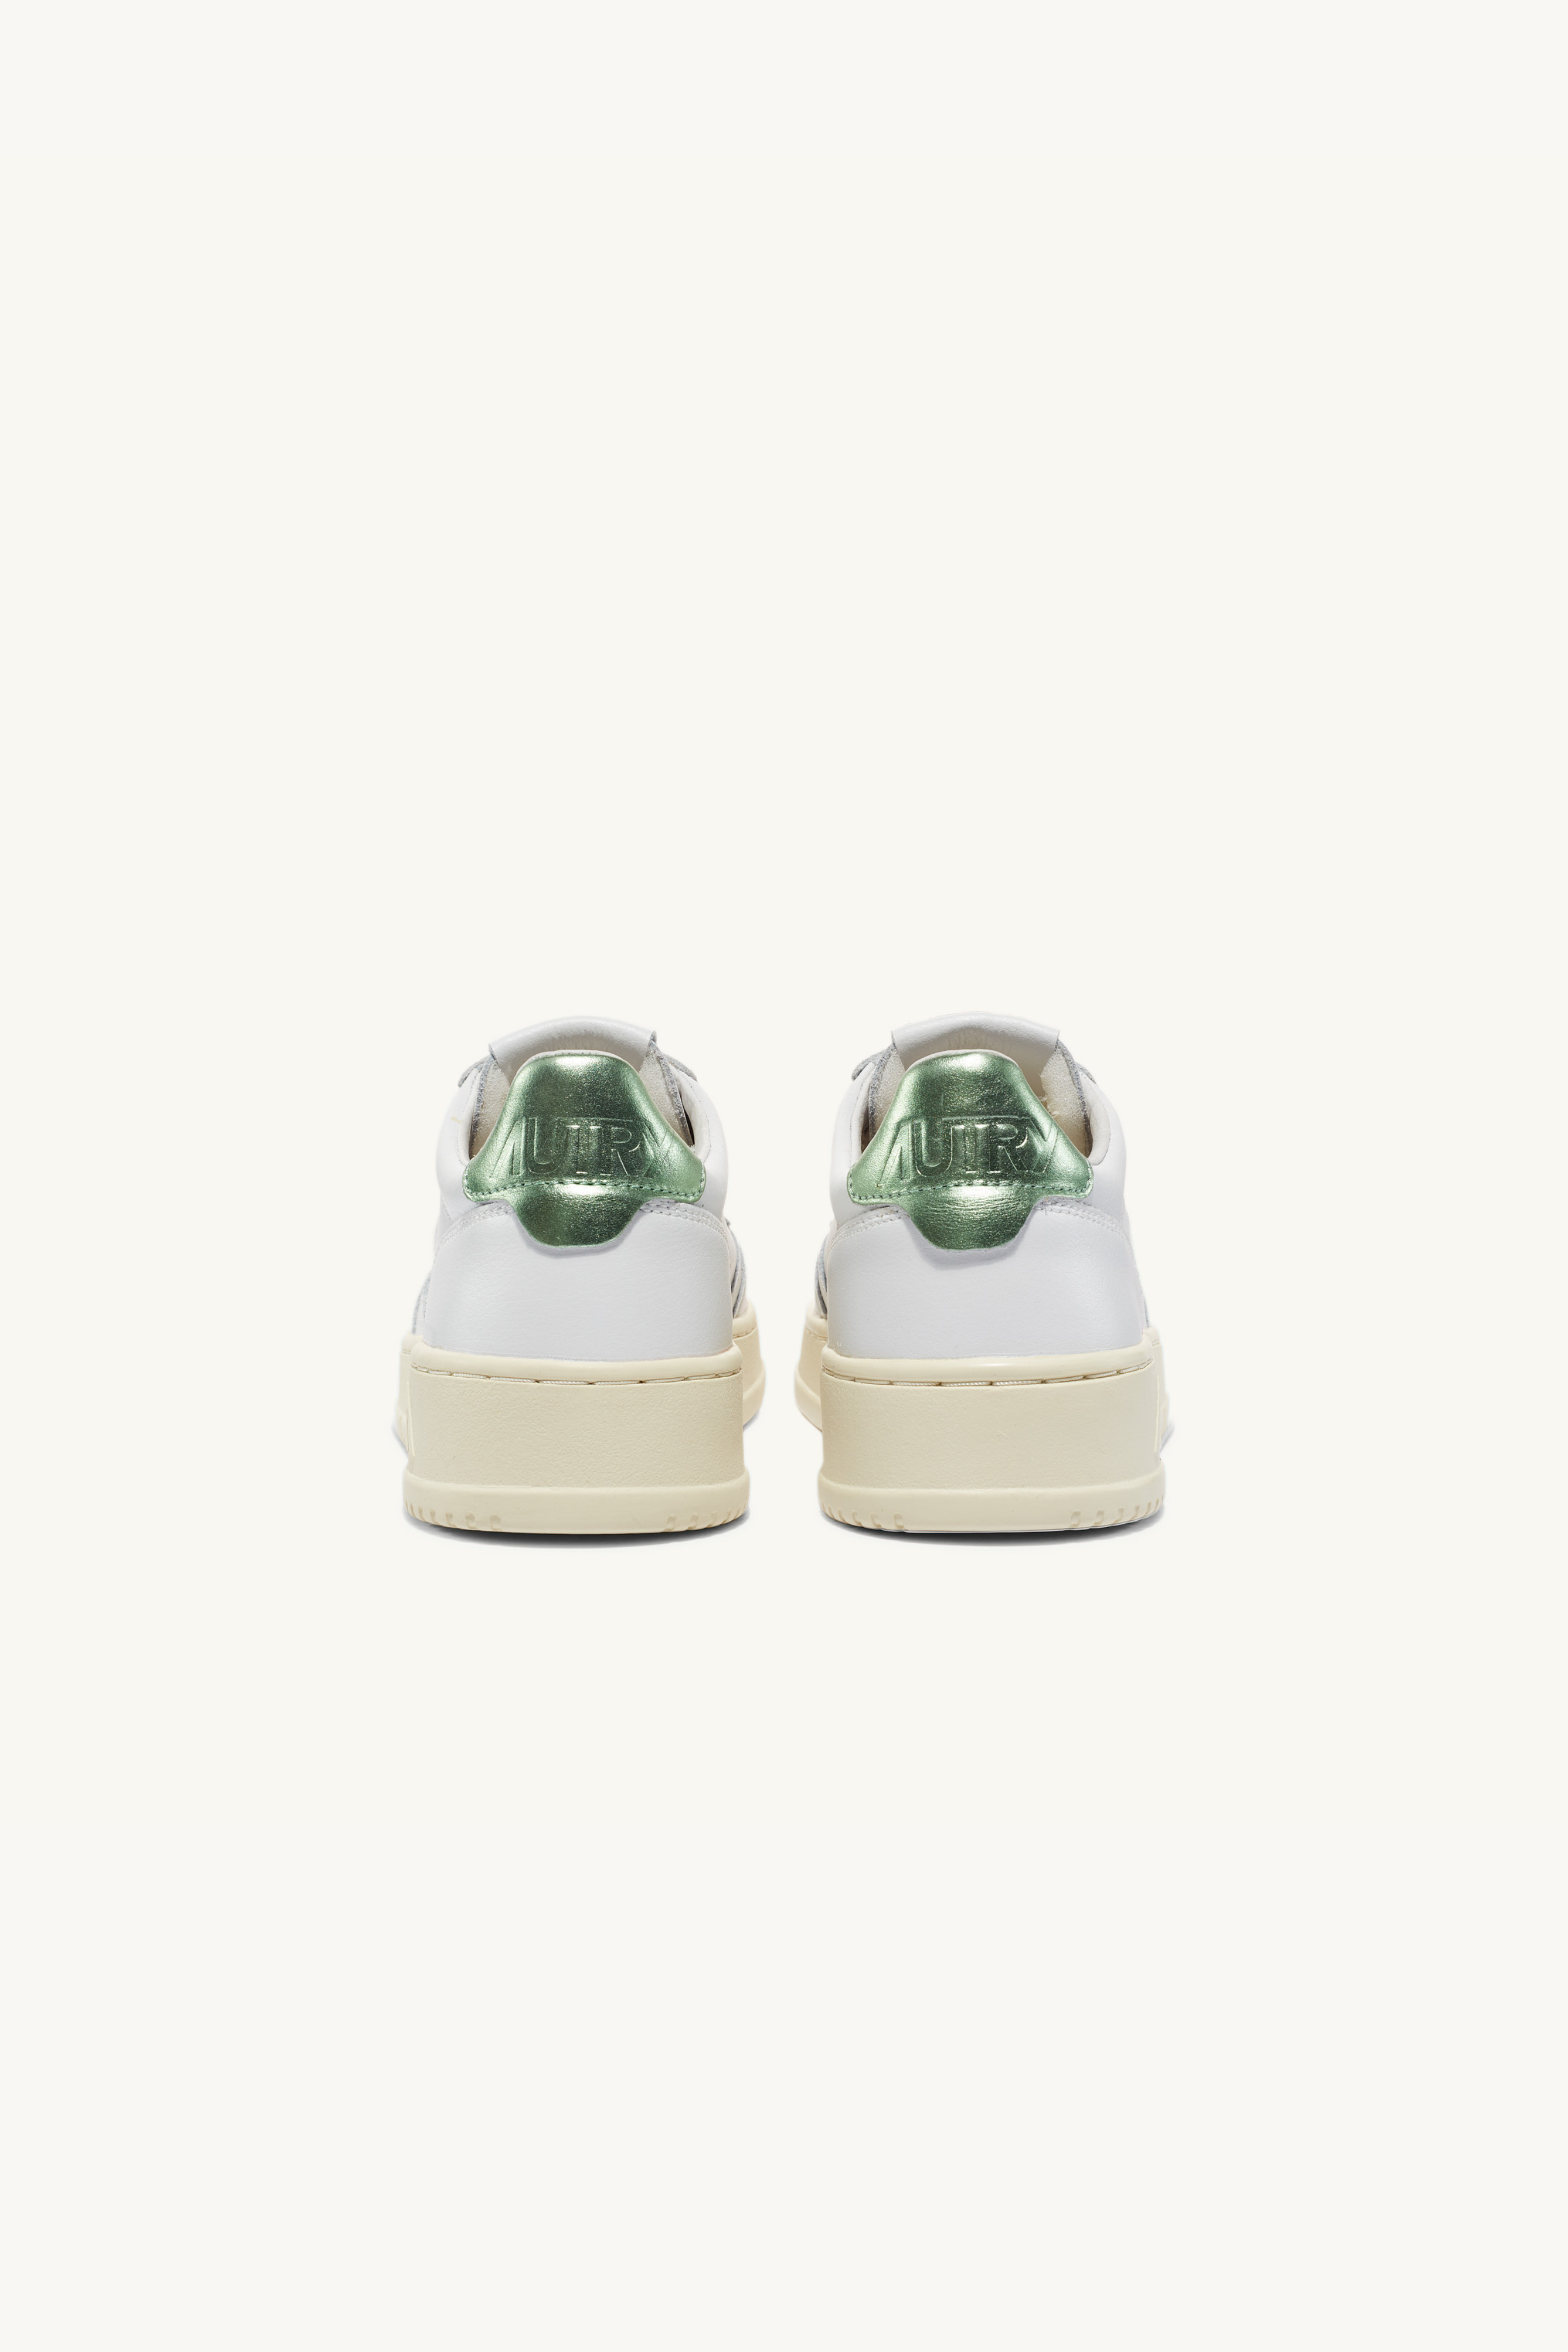 AULW-LL62 - MEDALIST LOW SNEAKERS IN LEATHER WHITE AND PASTEL GREEN